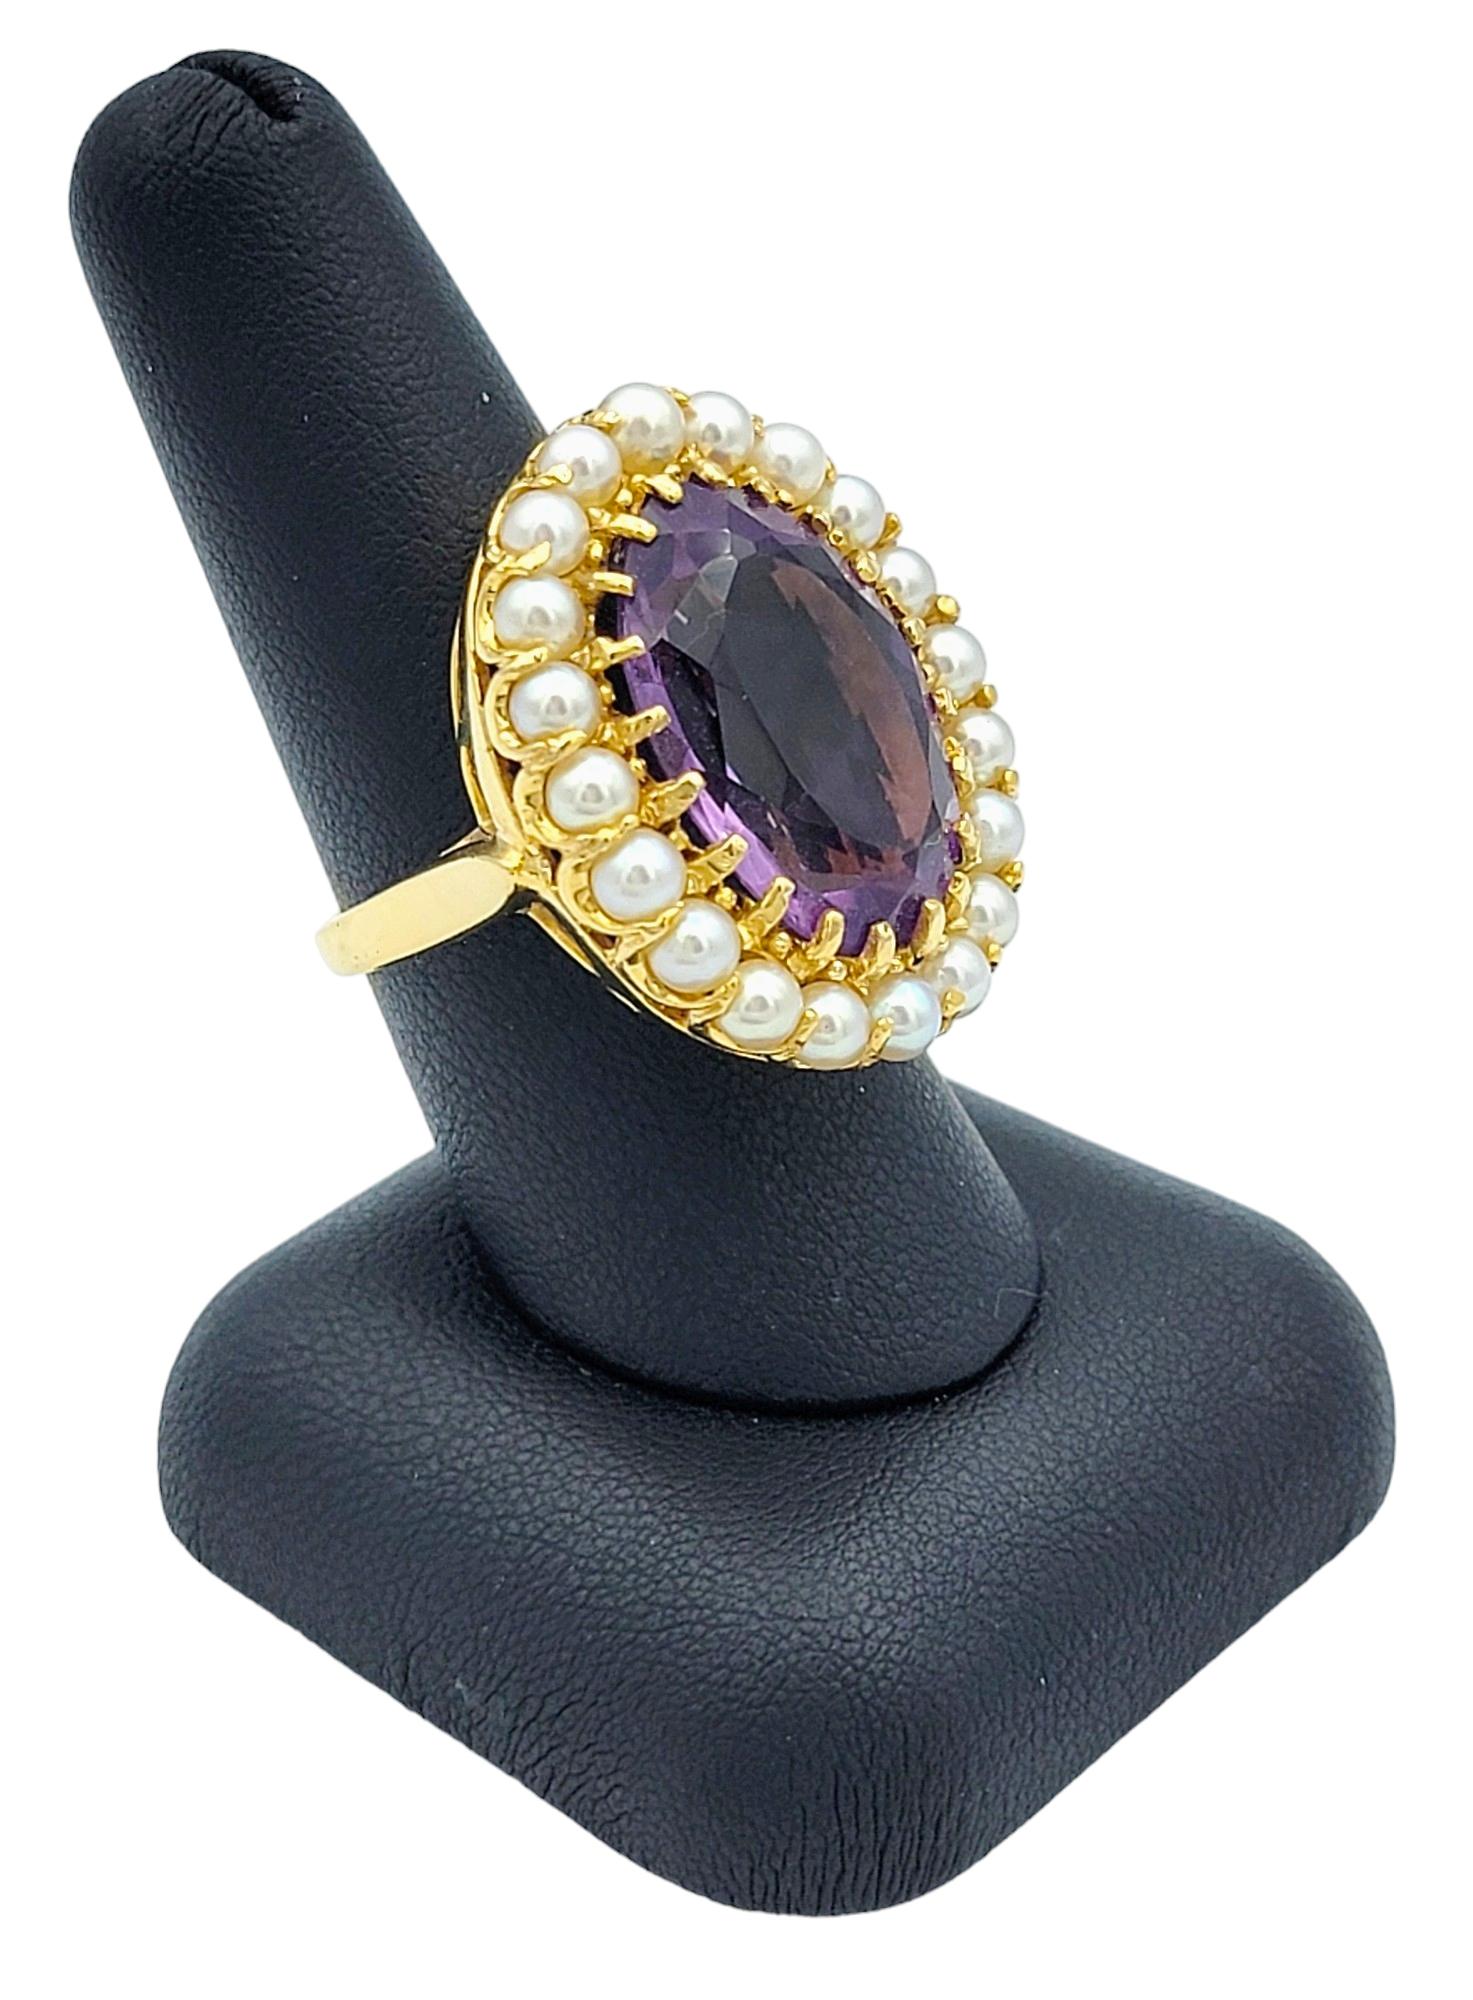 15.10 Carat Oval Amethyst and Seed Pearl Cocktail Ring in 14 Karat Yellow Gold For Sale 4